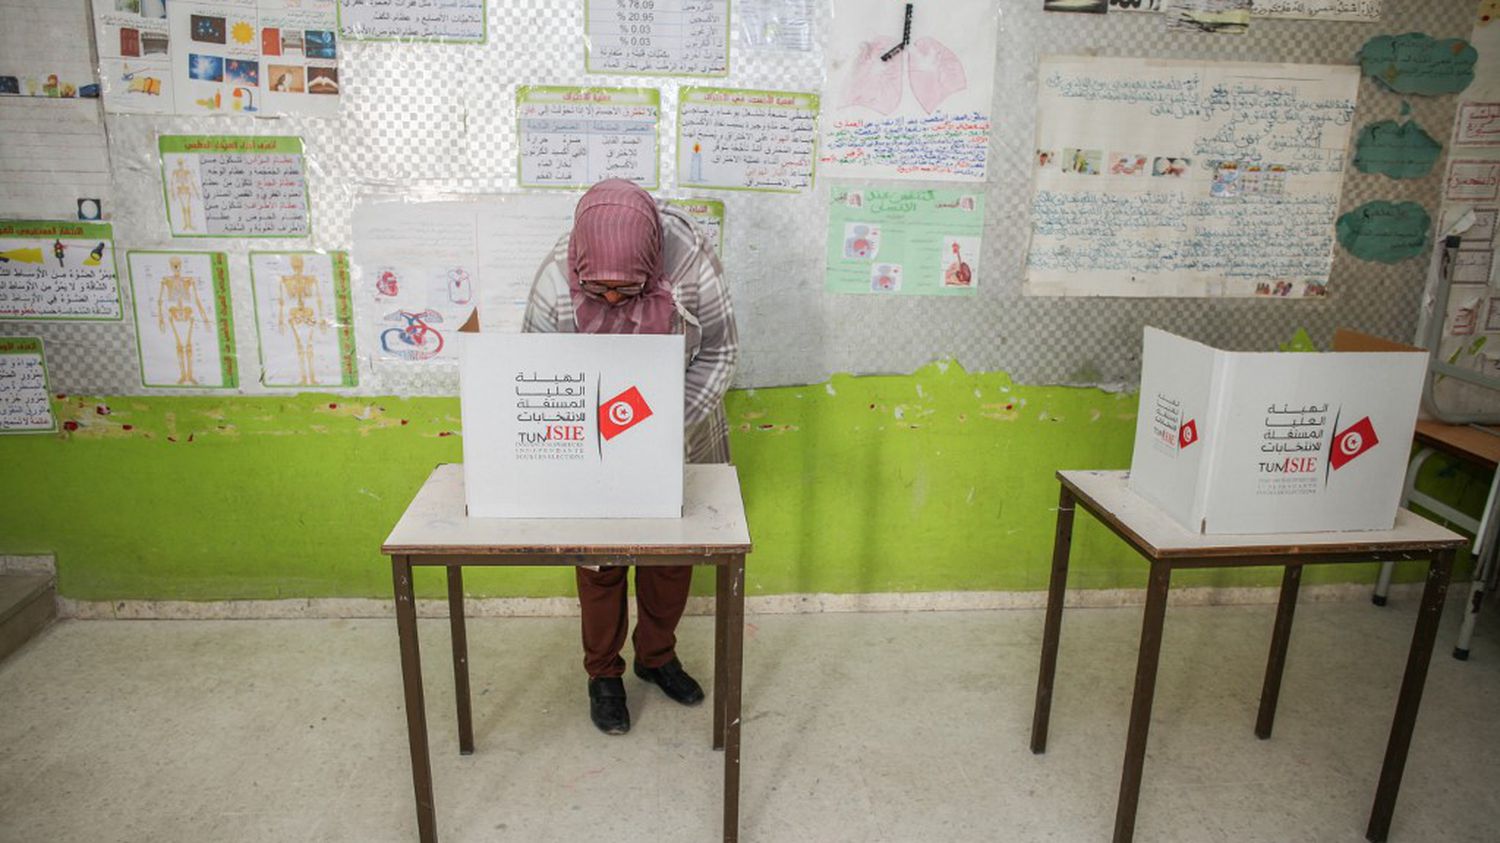 Tunisia: very low participation in the second round of legislative elections, a new disavowal for the president
